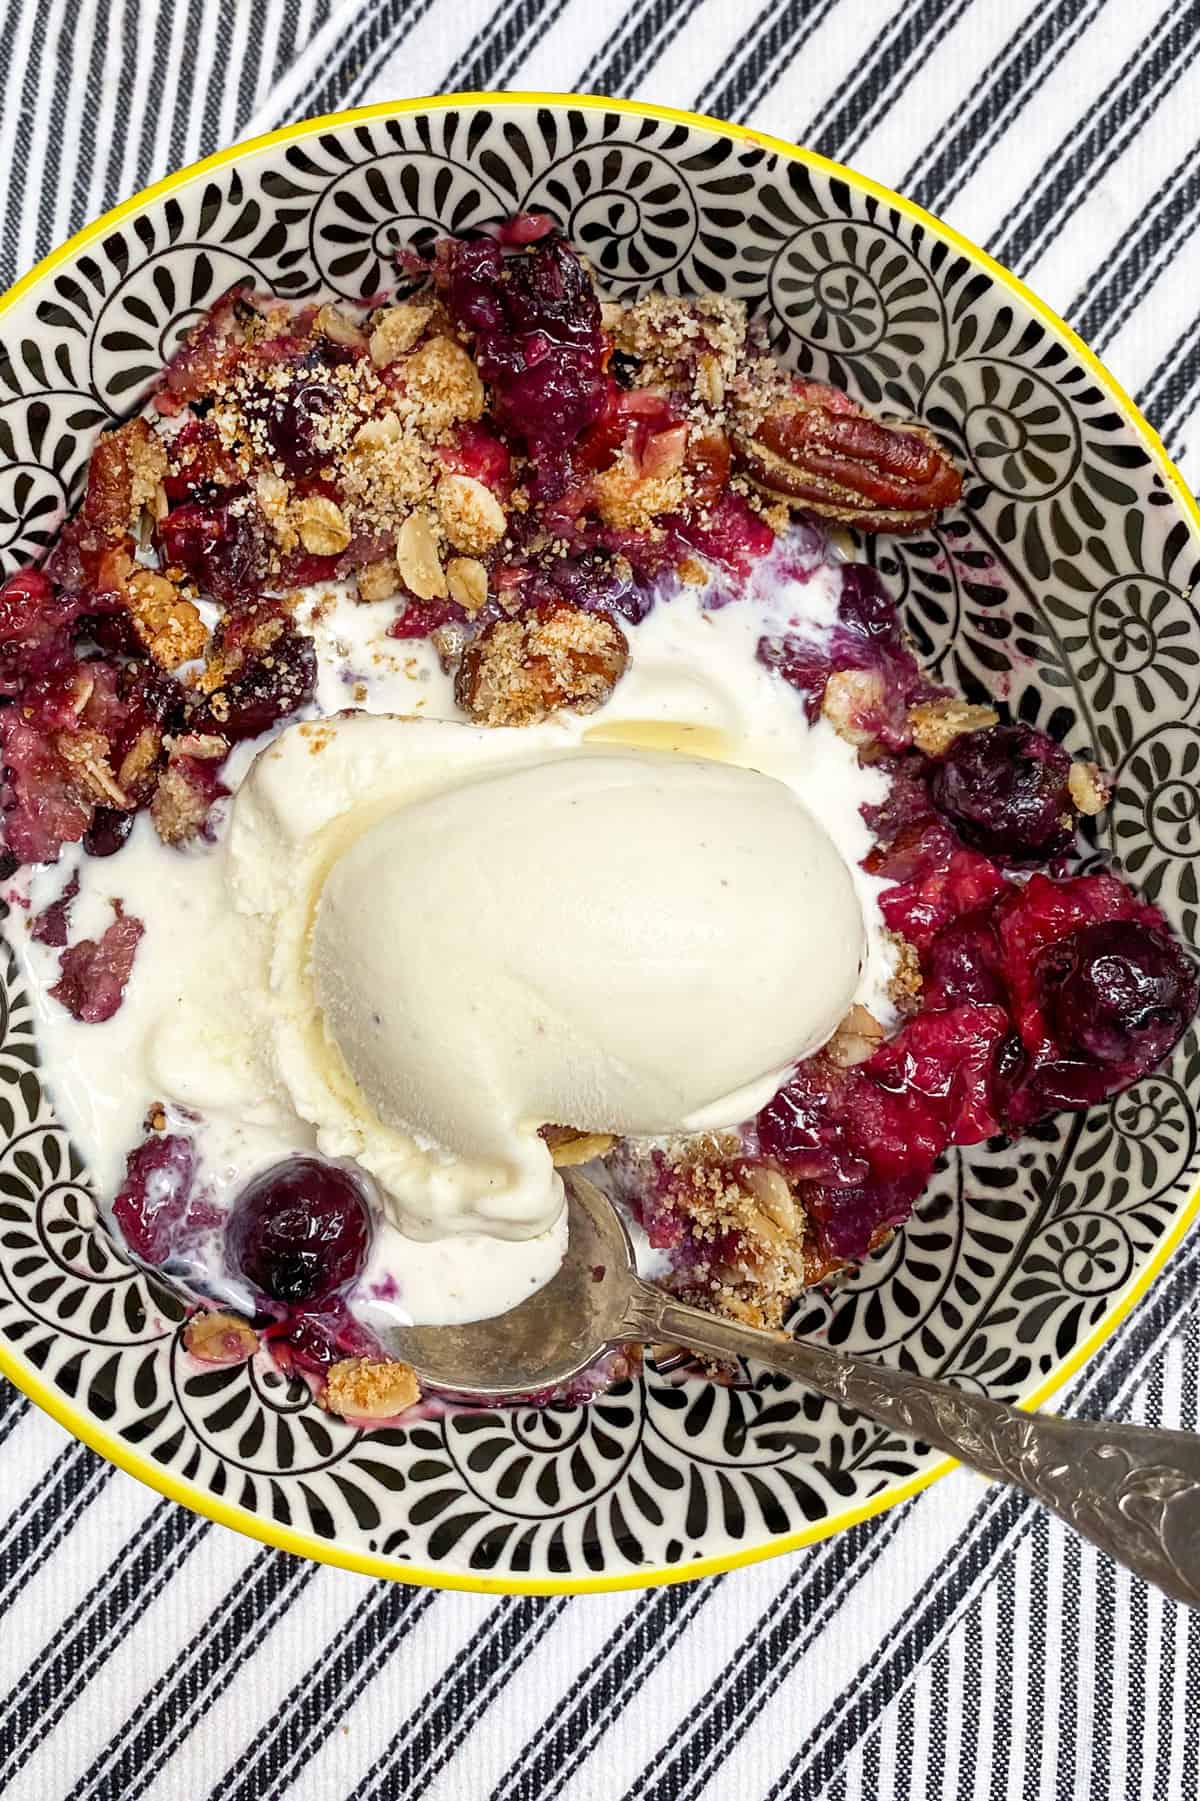 Mixed berry crumble in a bowl topped with ice cream, on a black and white striped dish cloth